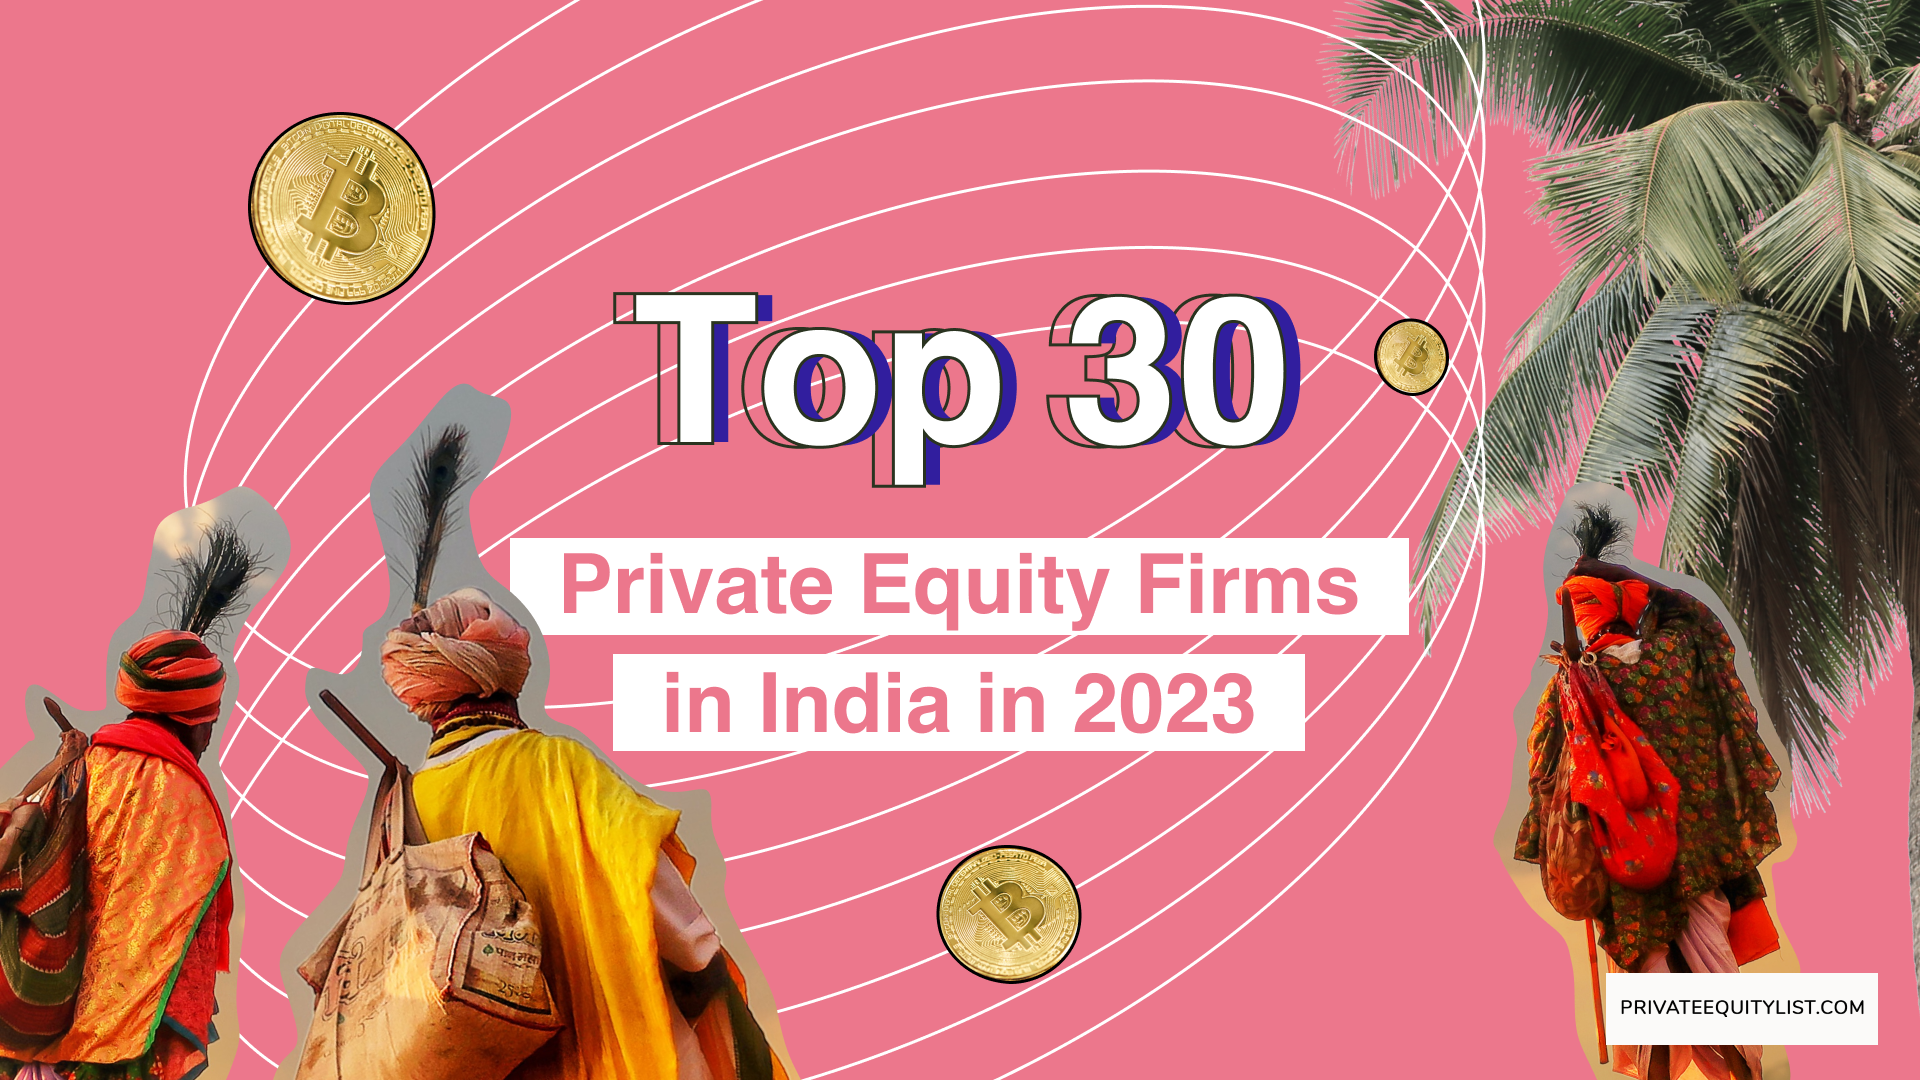 Top 30 Private Equity Firms in India in 2023